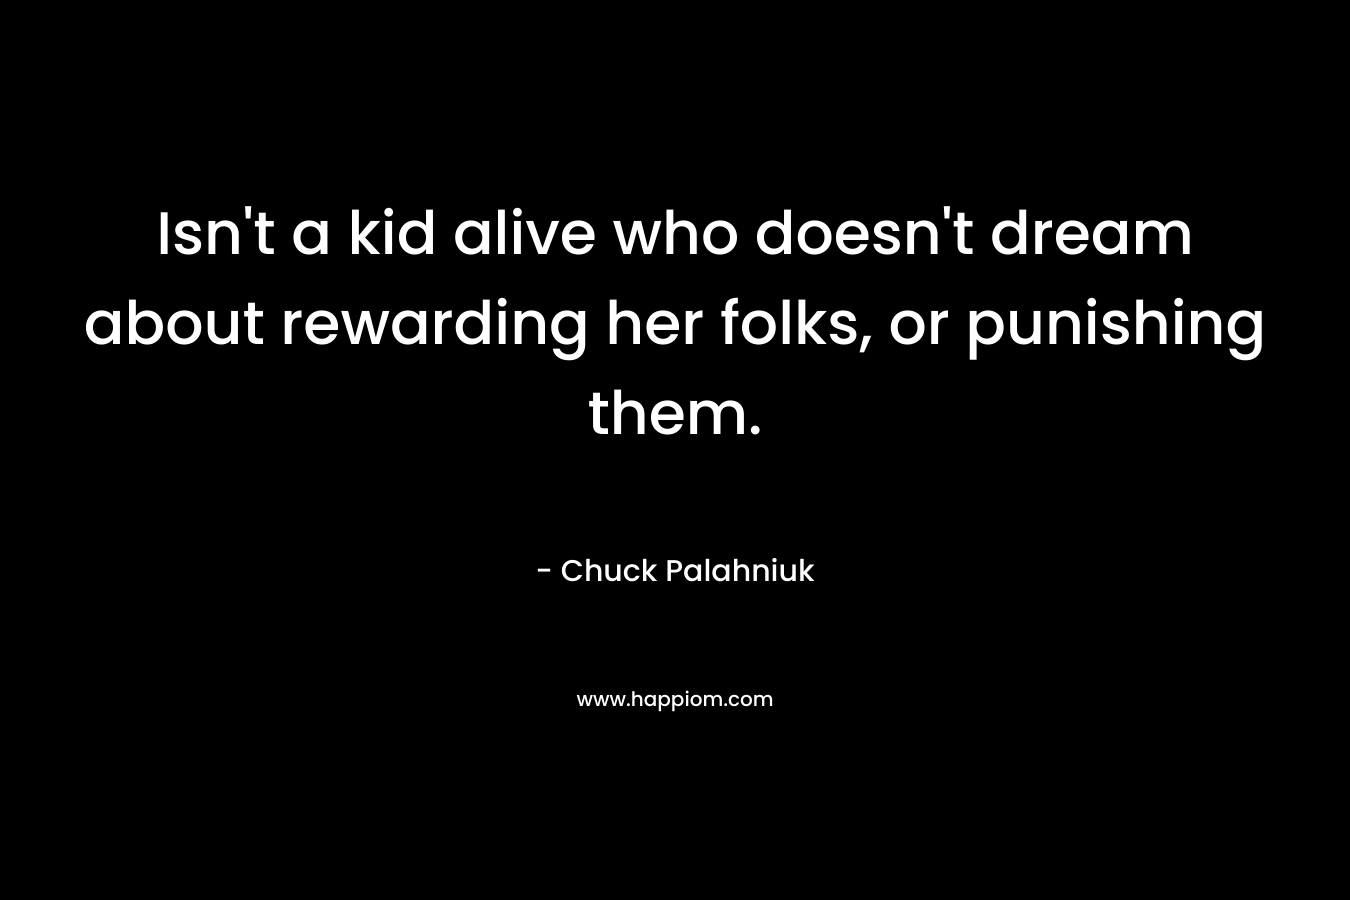 Isn't a kid alive who doesn't dream about rewarding her folks, or punishing them.